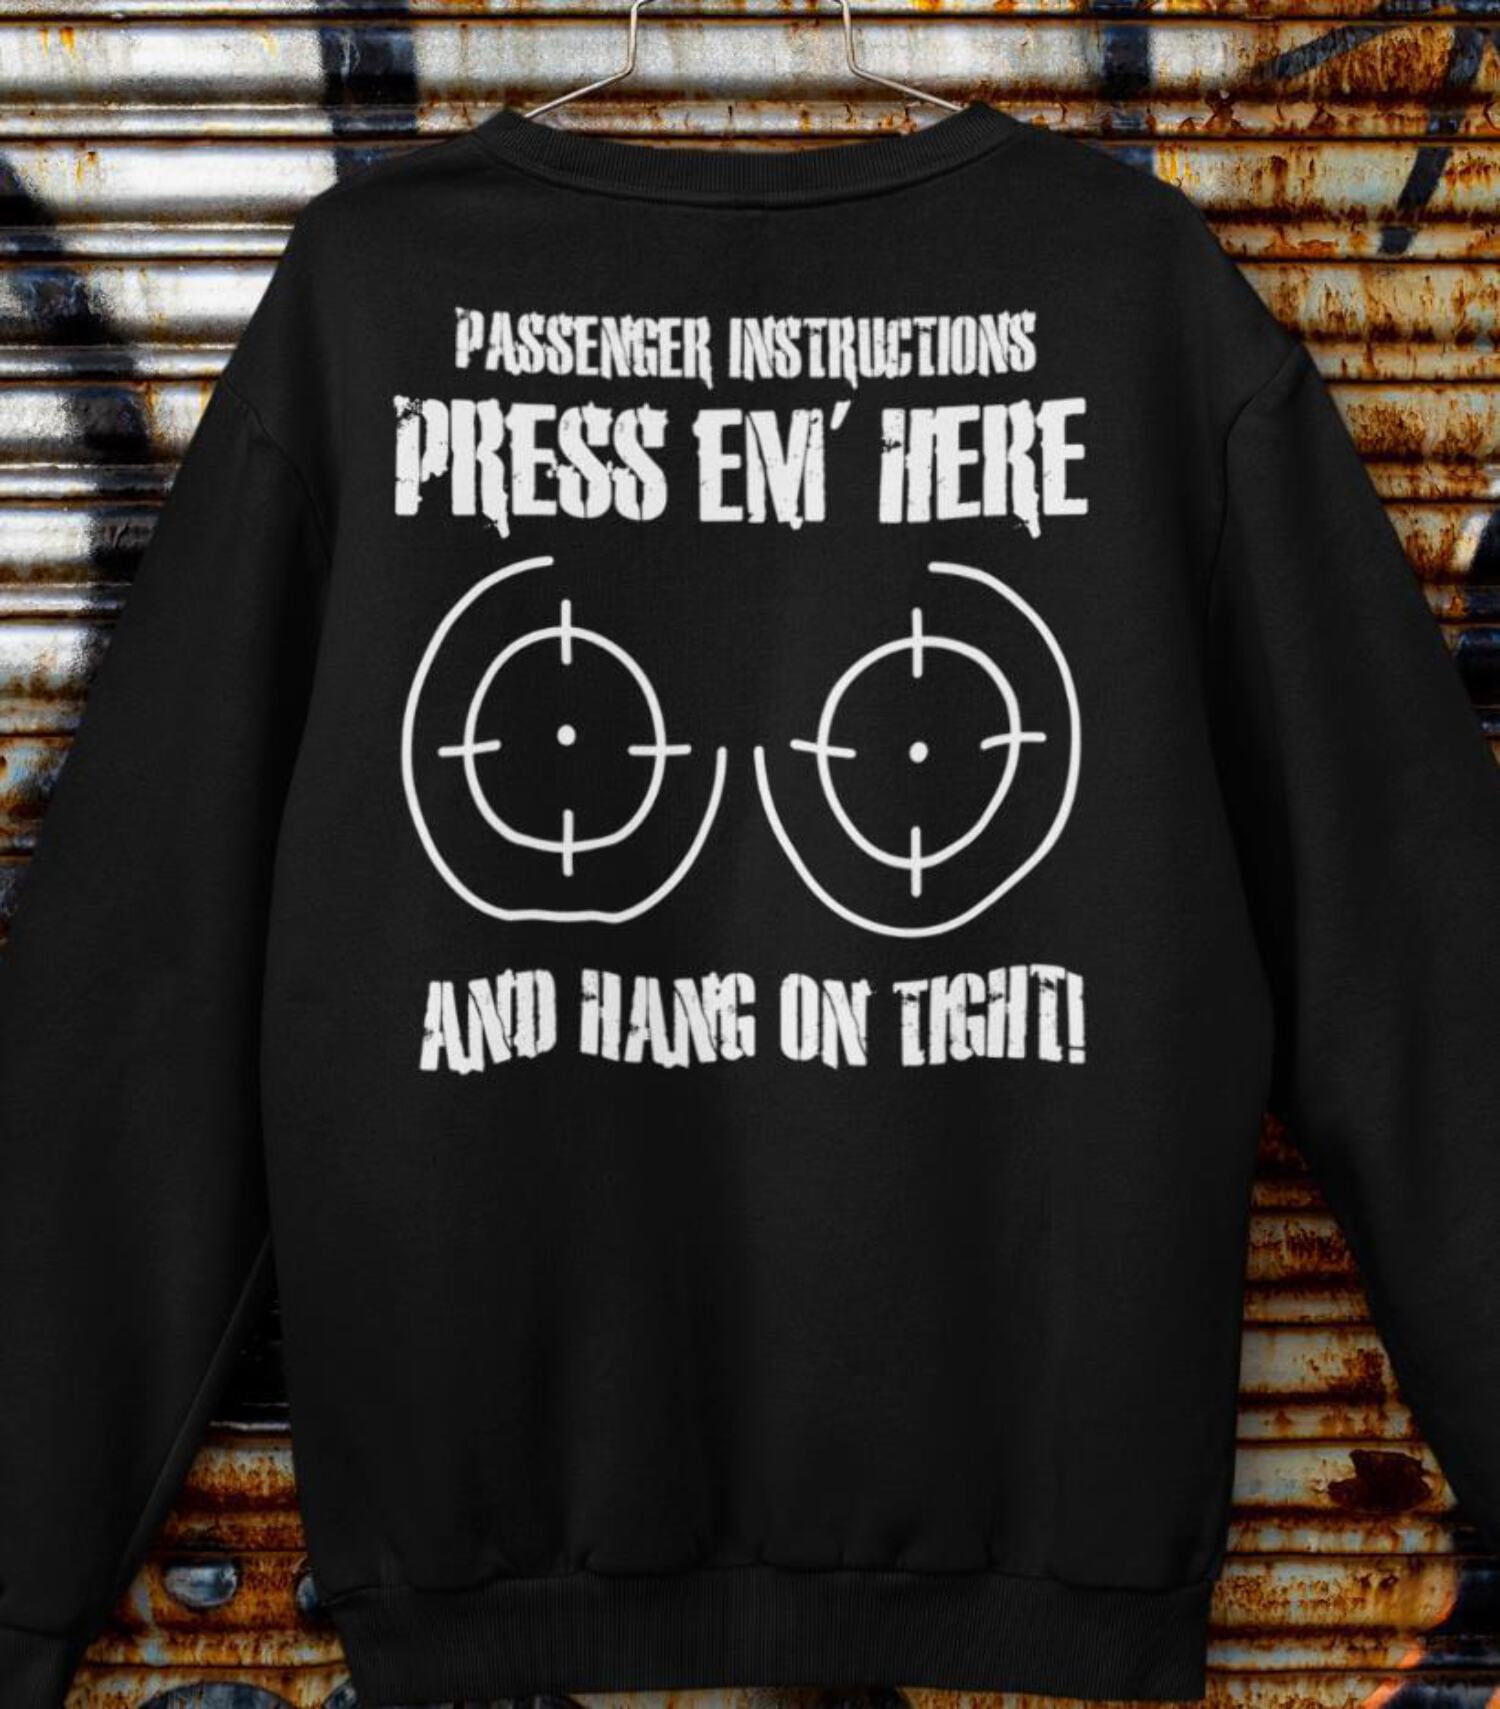 Press your Boobs Here and Hang on - Biker Funny T Shirts, Sweatshirts  Hoodys/ 